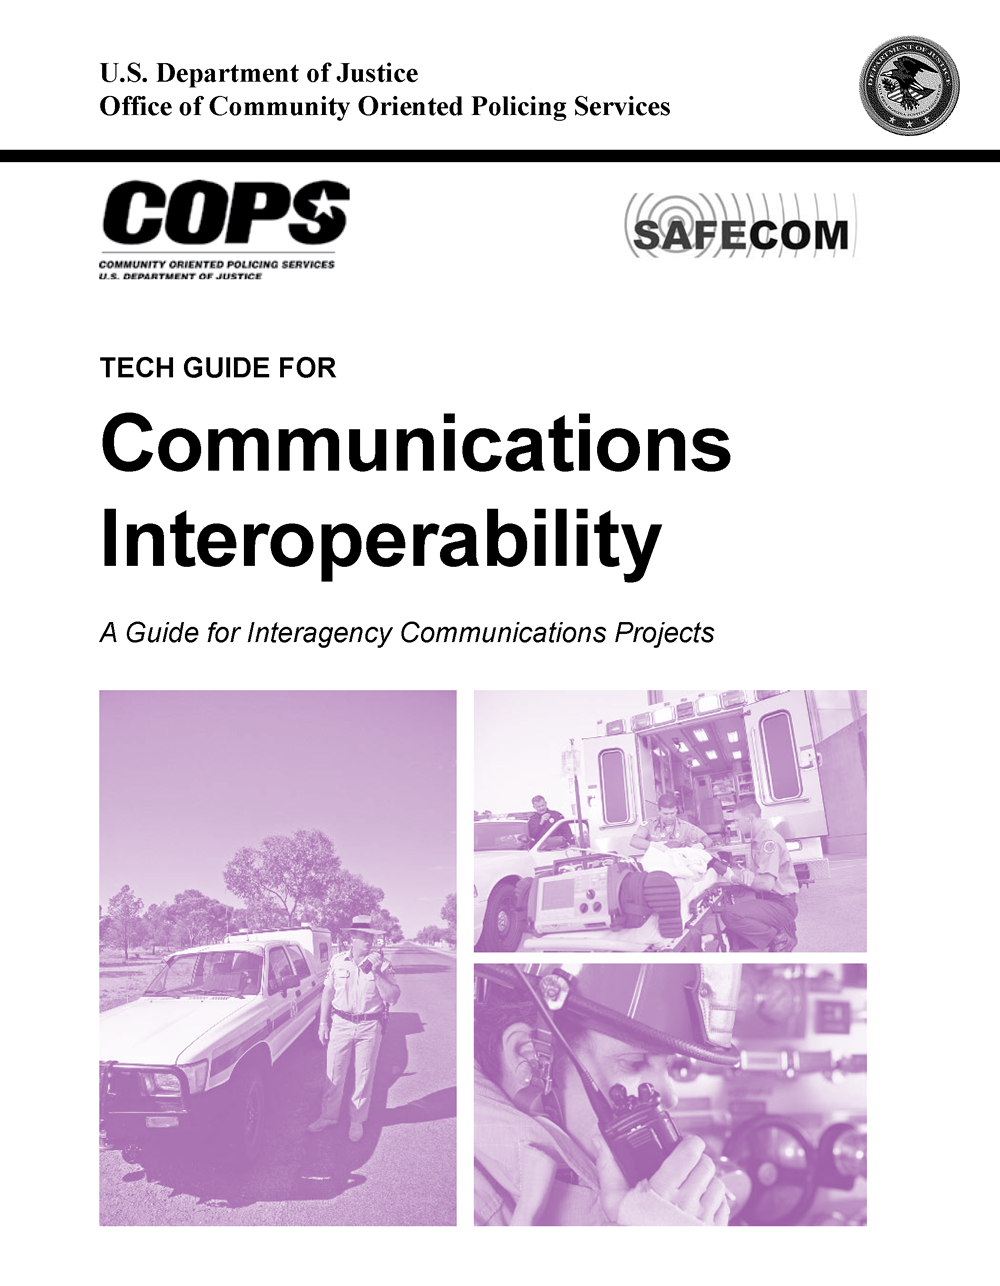 photo of Tech Guide for Communications Interoperability 2006